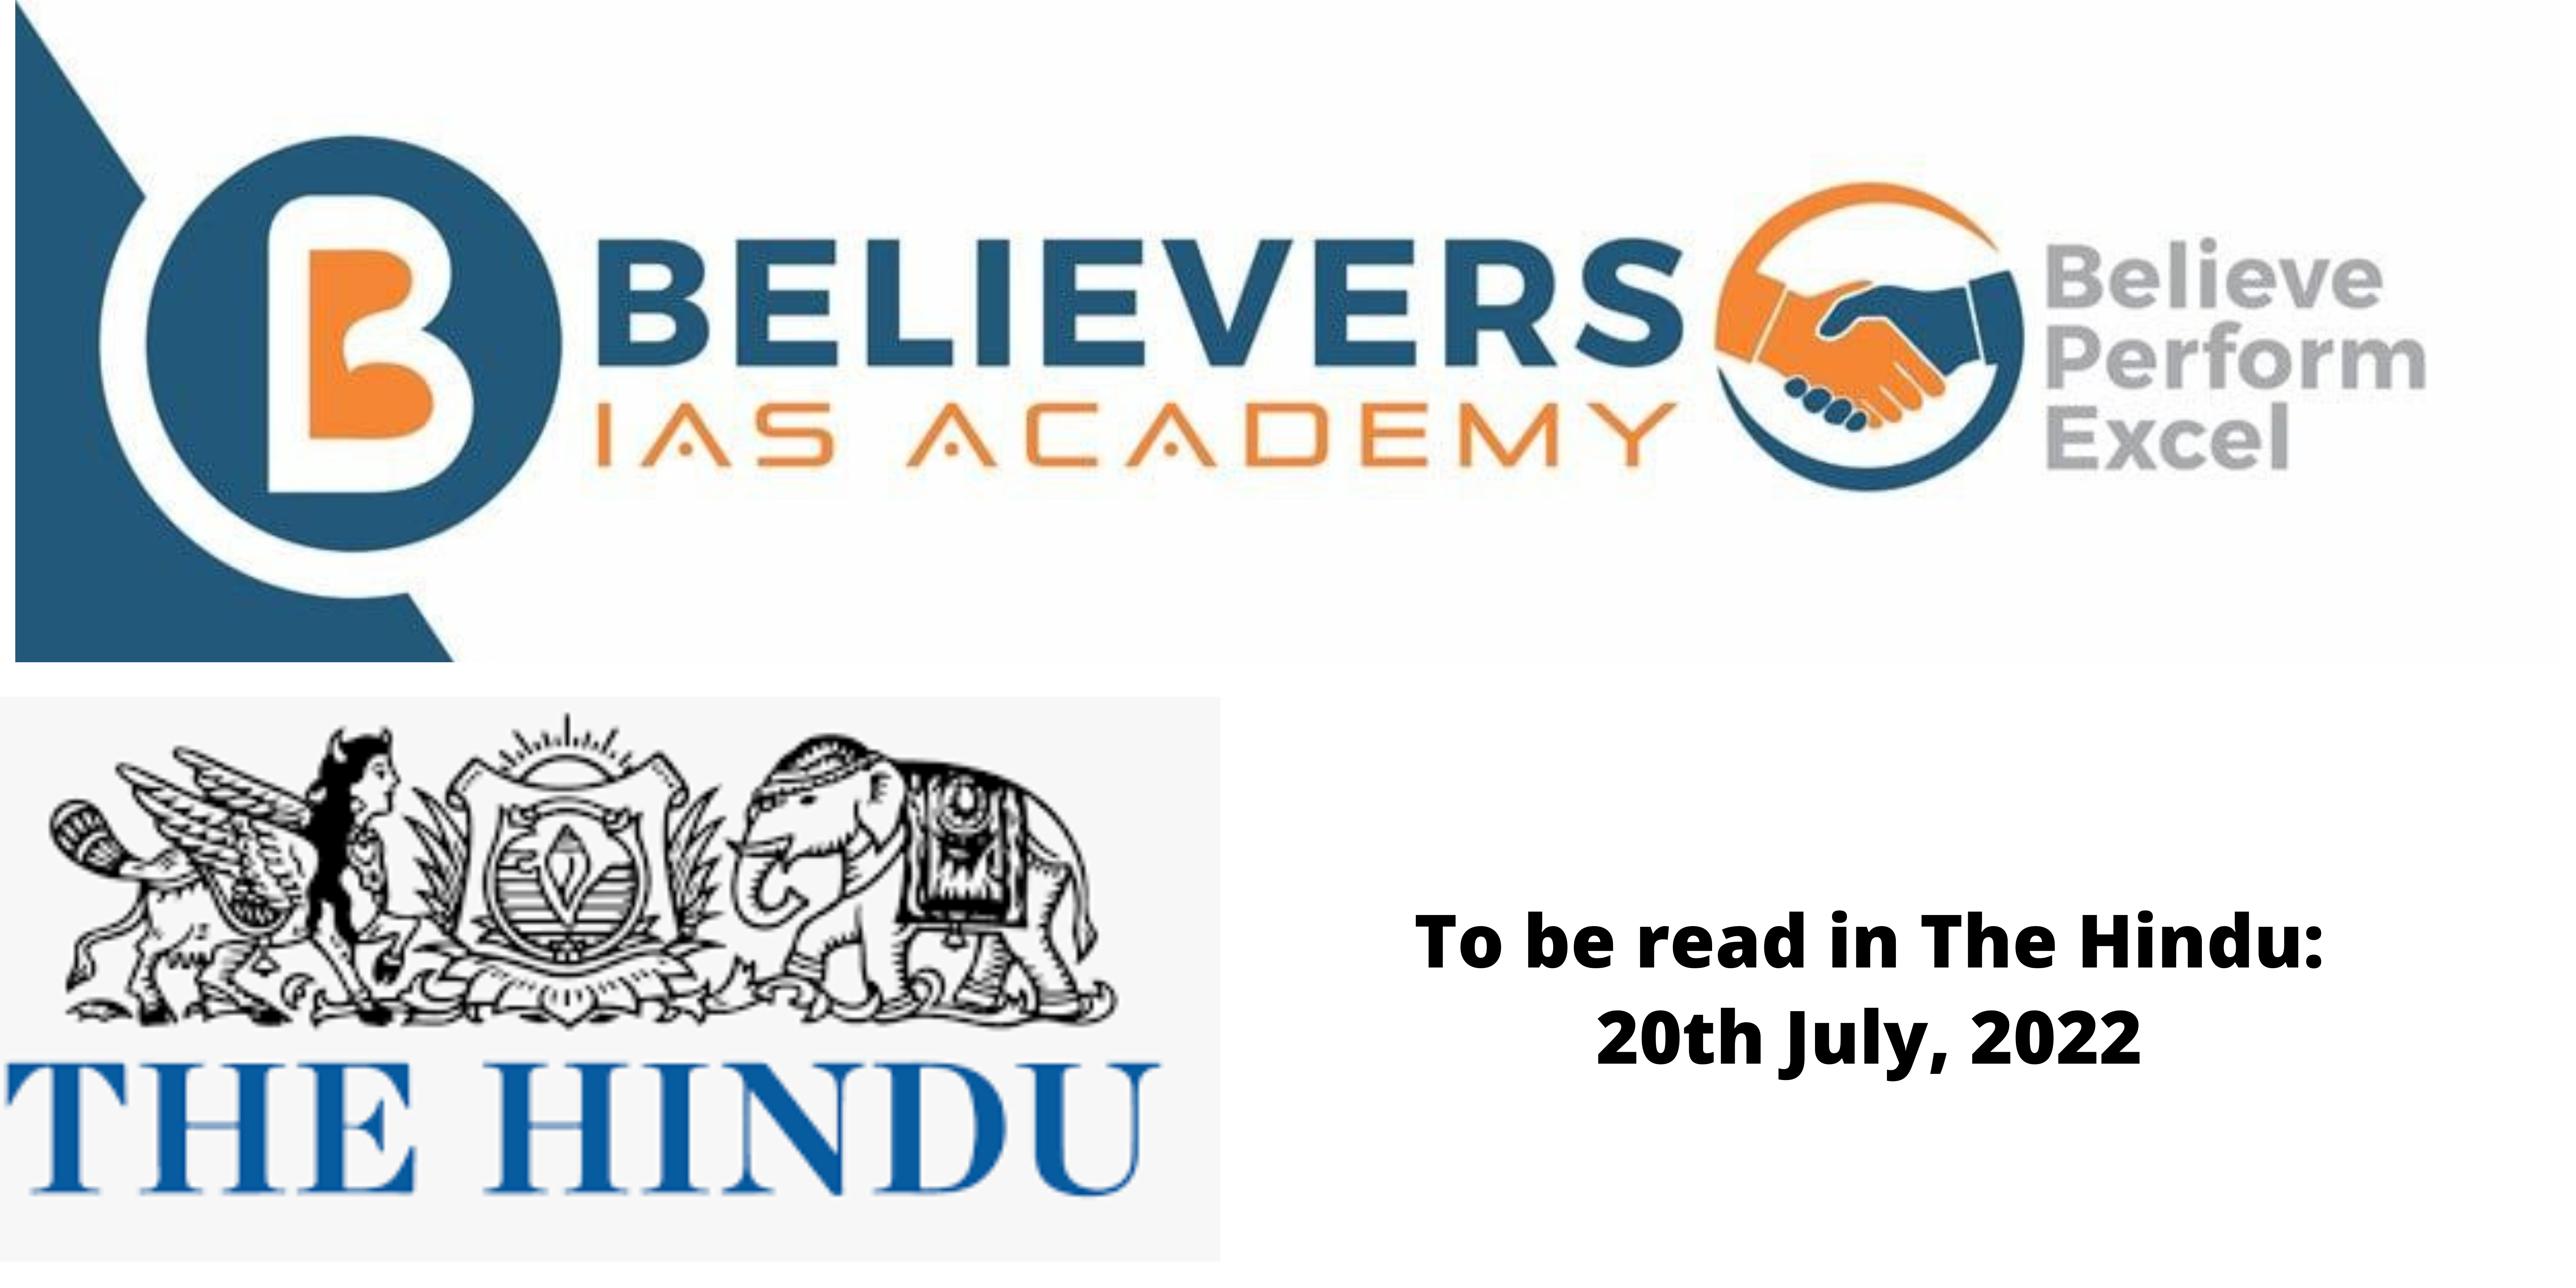 News articles for IAS Exam preparation - 20th July, 2022